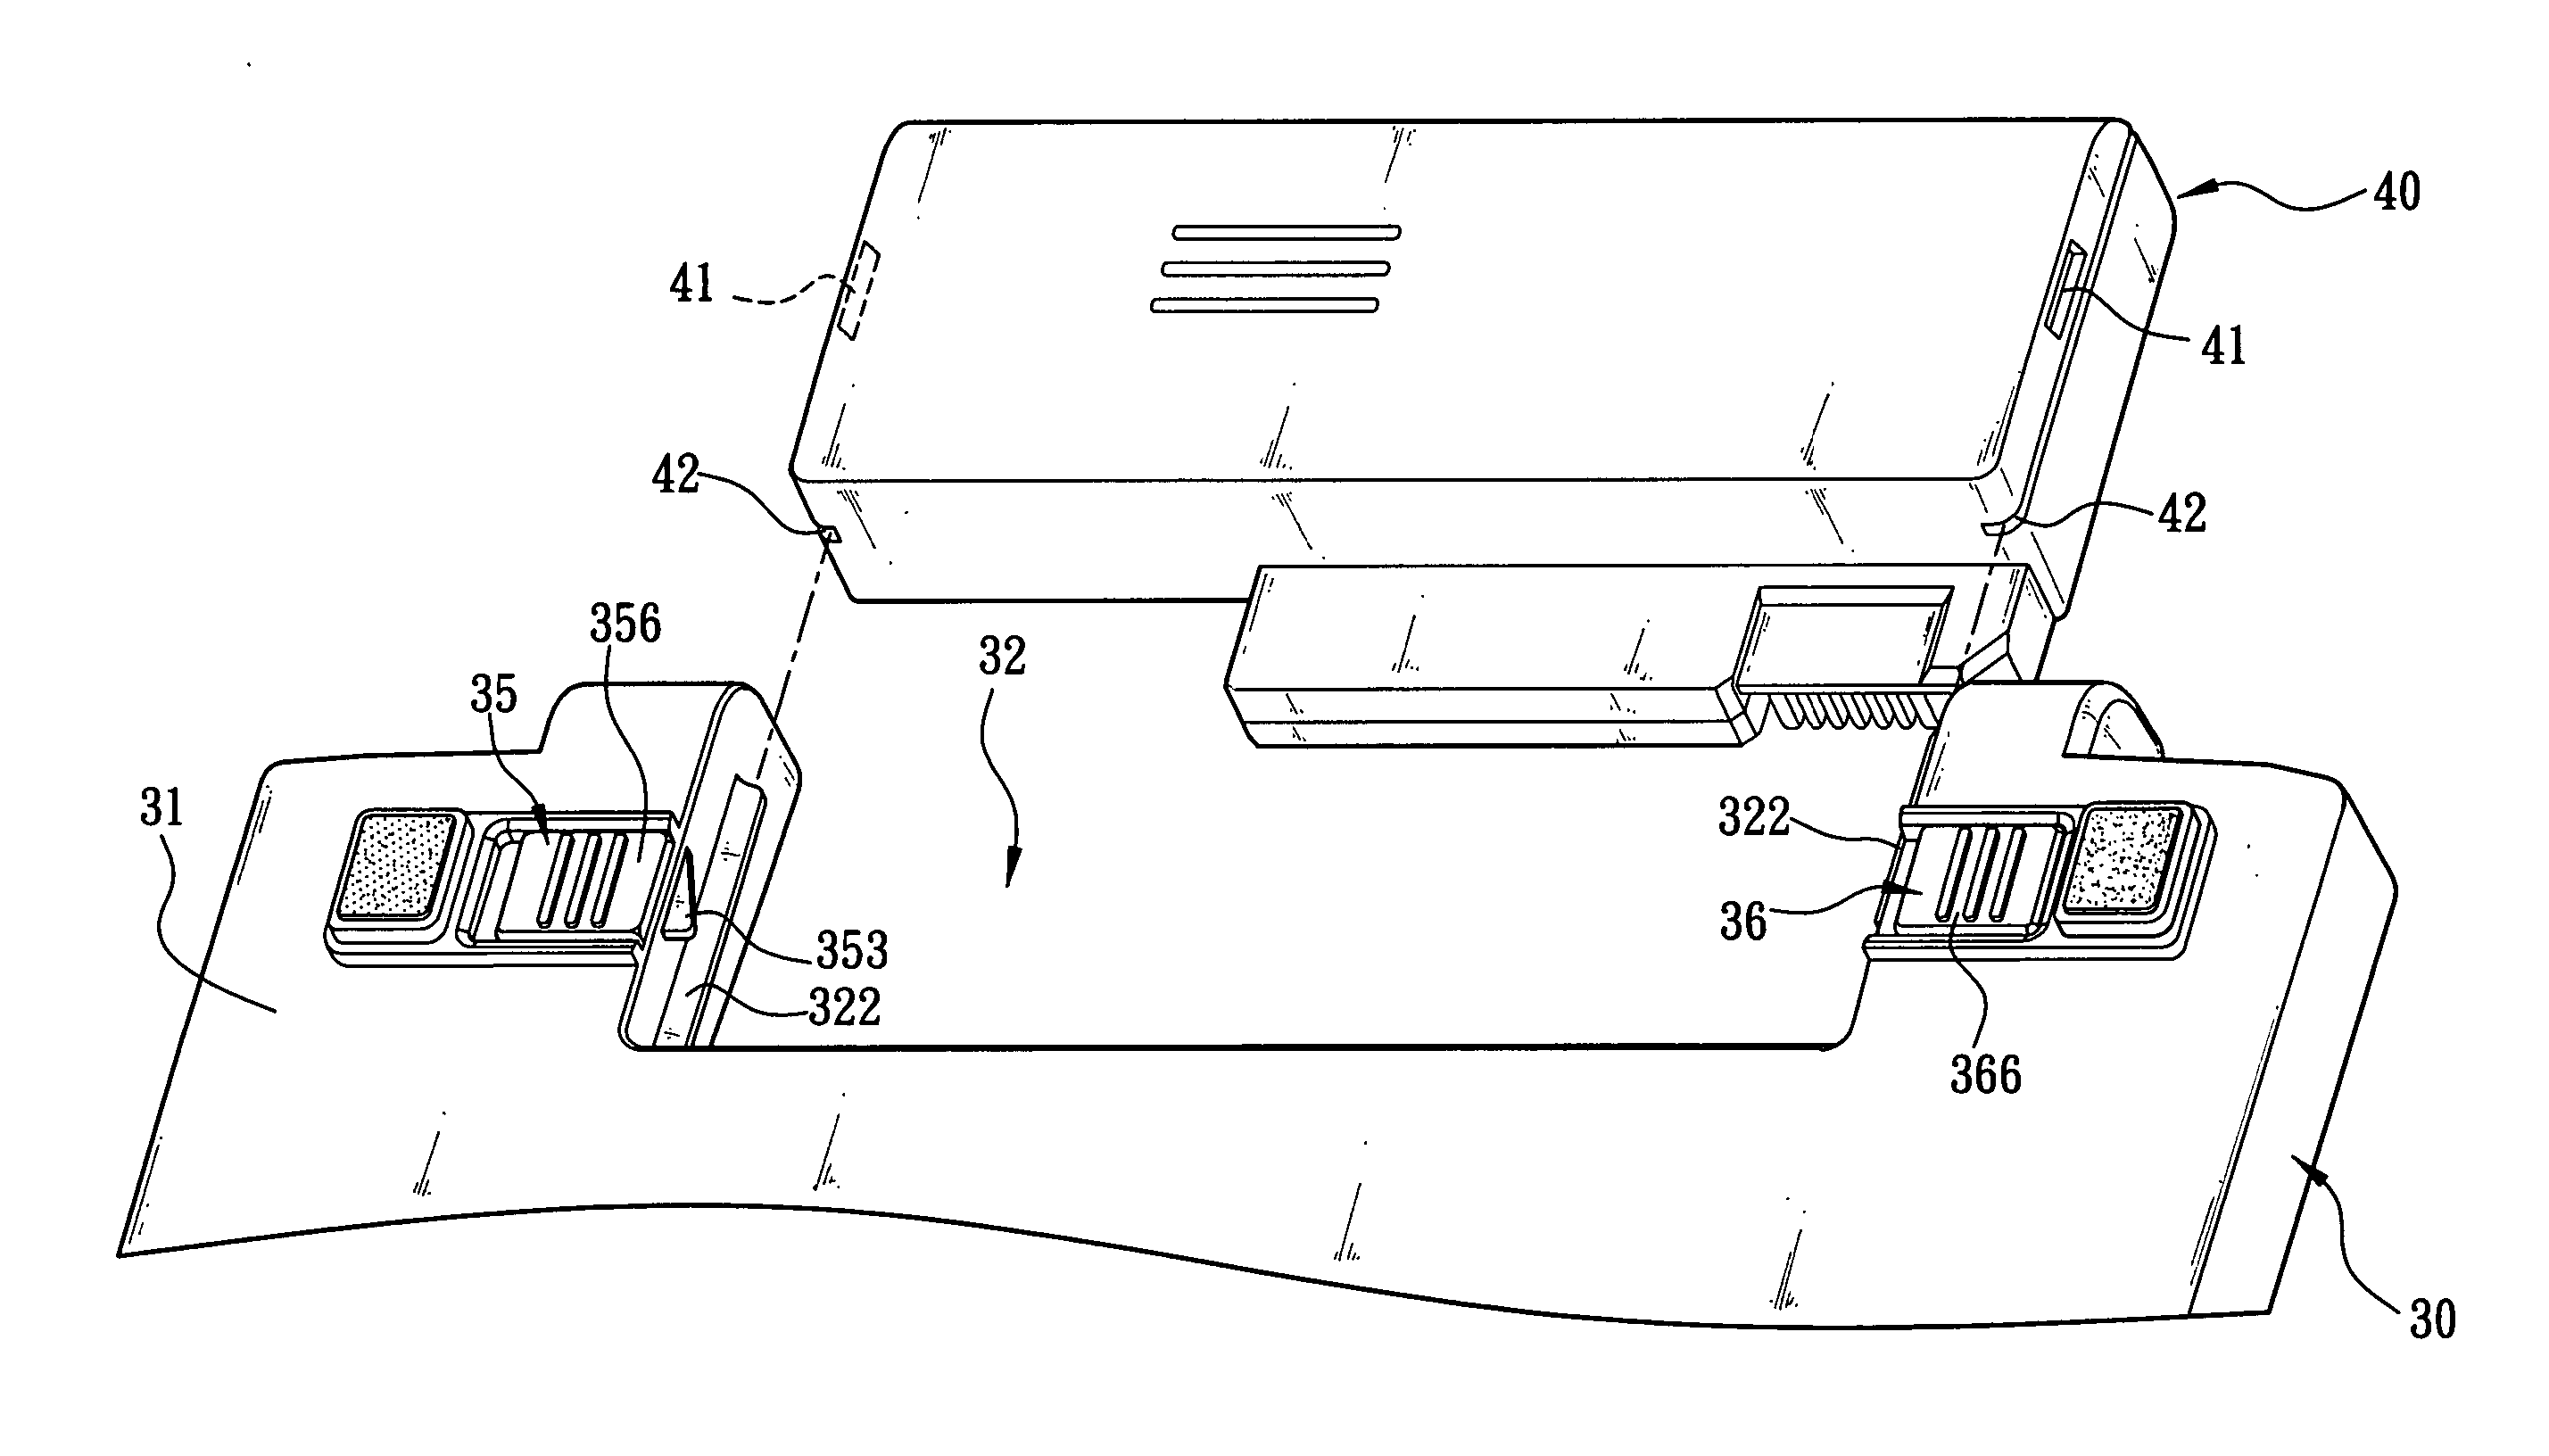 Module assembly for locking and unlocking a battery of an electronic device